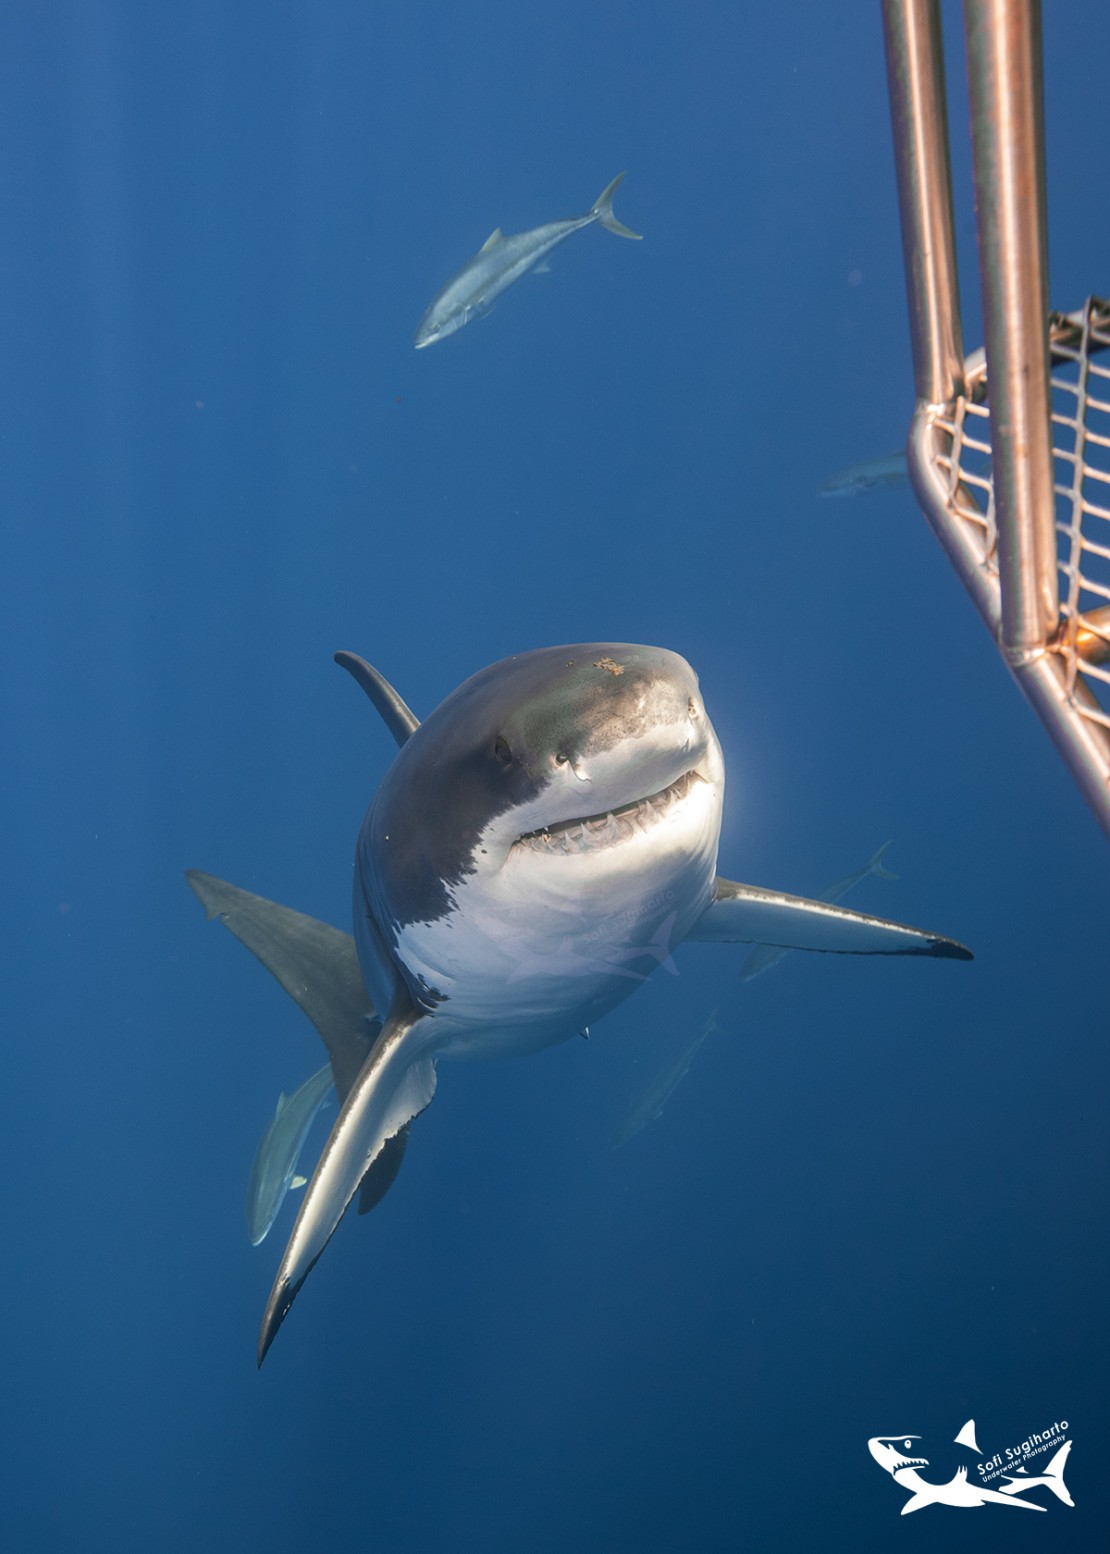 My first Great White Shark diving, and my first live aboard….